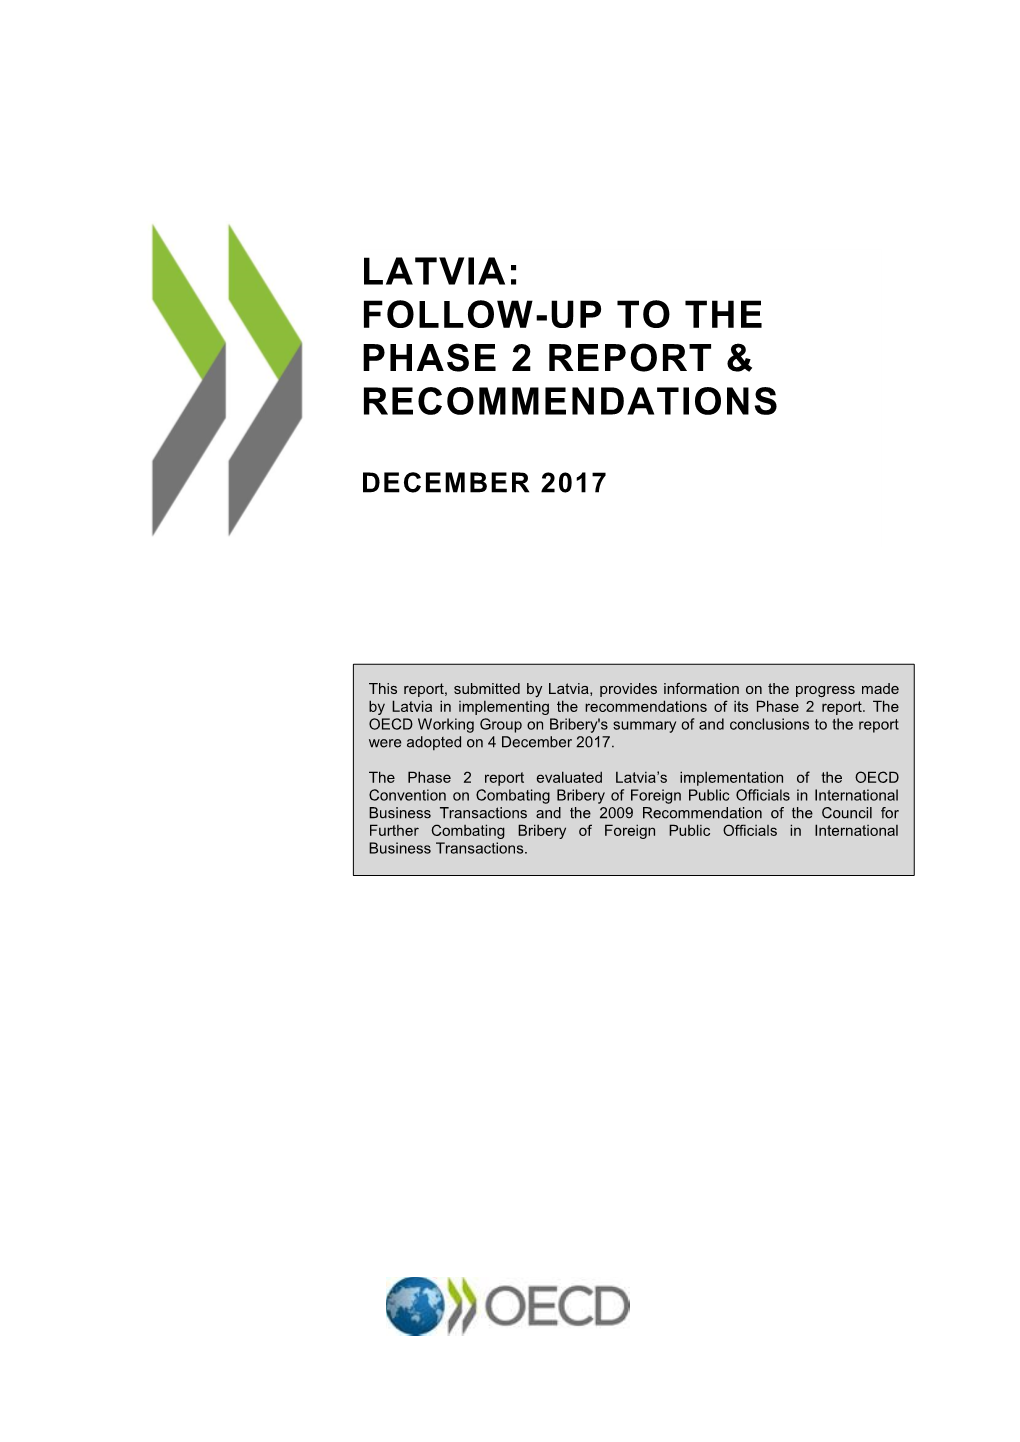 Latvia: Follow-Up to the Phase 2 Report & Recommendations